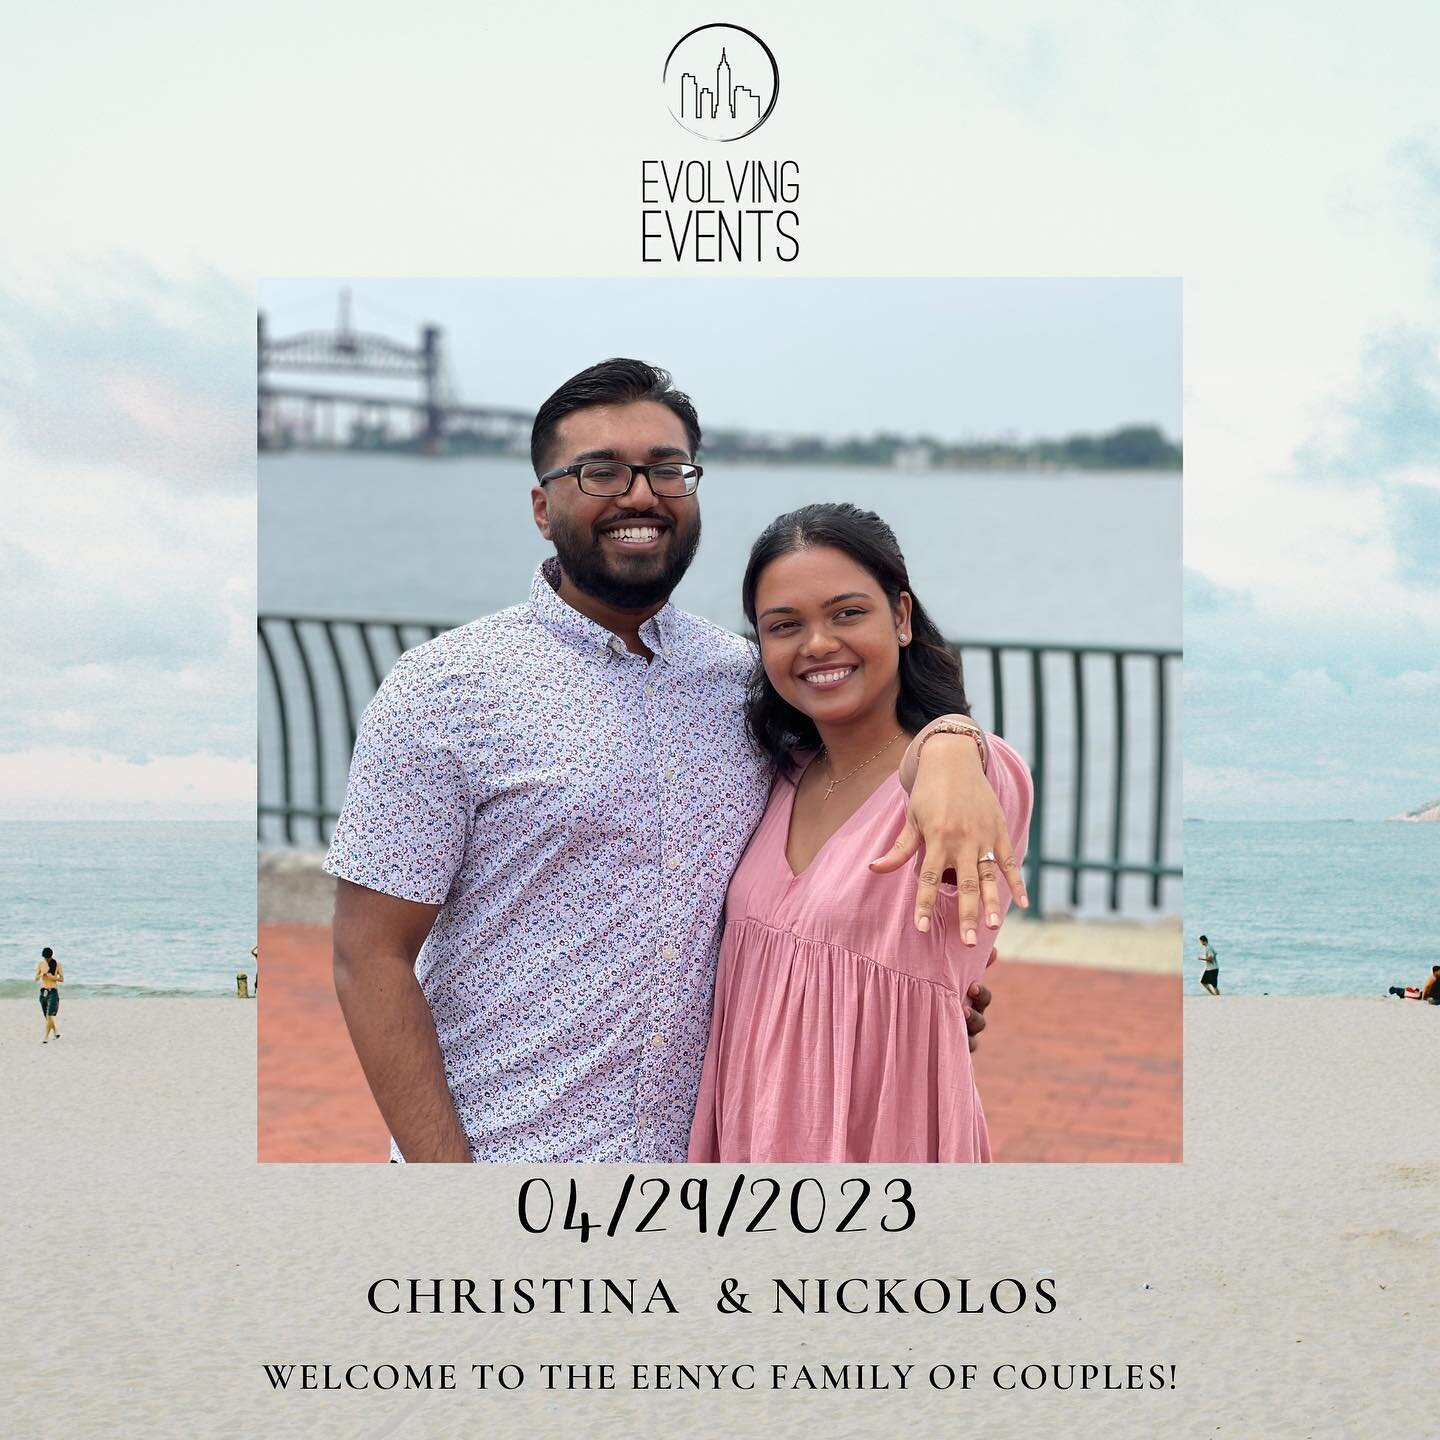 Always exciting to welcome new couples into our  family of couples 🙌🏽! Especially when they are from our BWW family. Always a great time with this amazing group of people! Christina &amp; Nickolos, we look forward to celebrating your big day with y